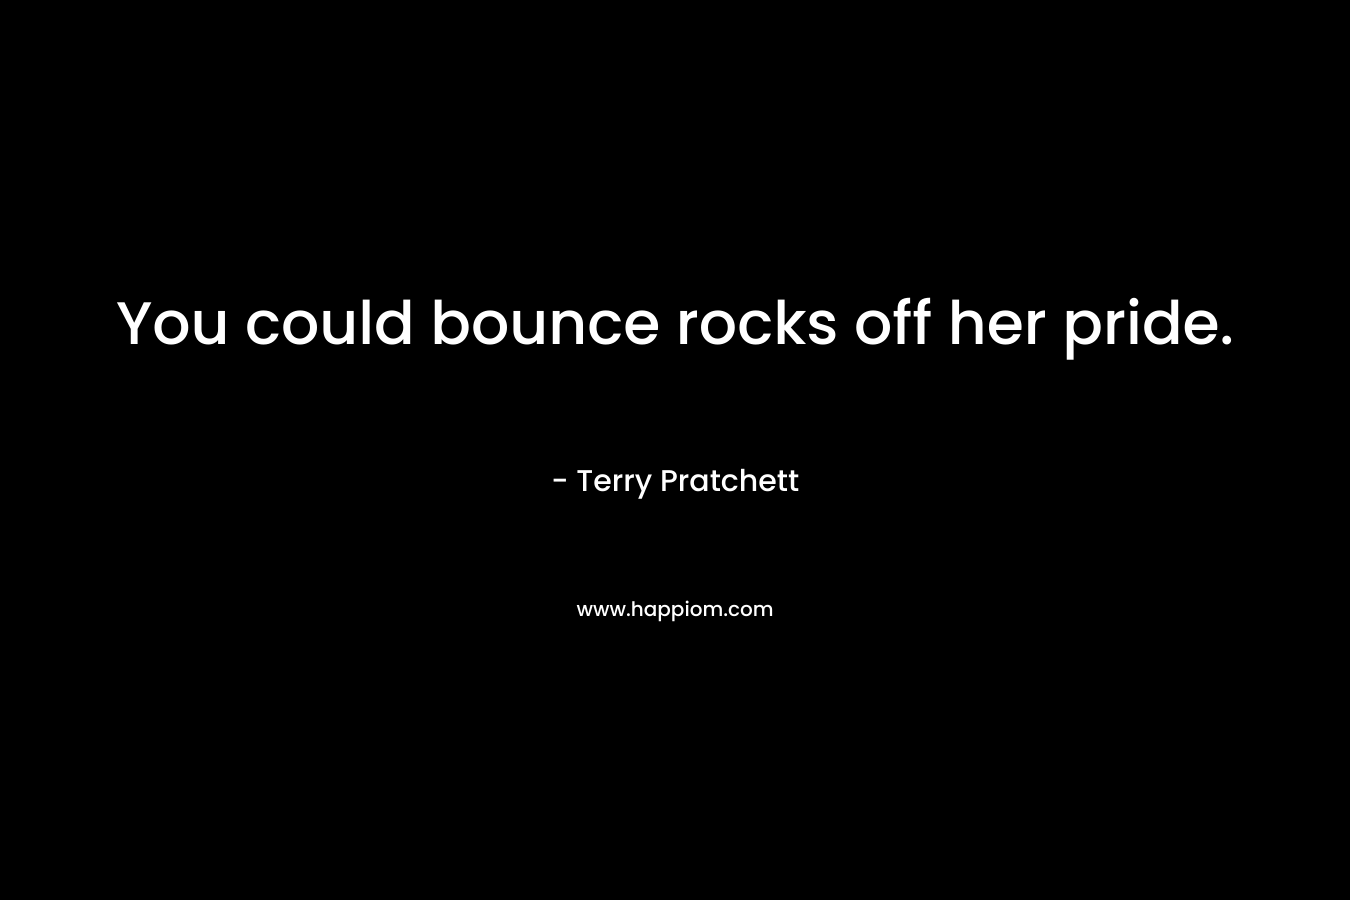 You could bounce rocks off her pride. – Terry Pratchett